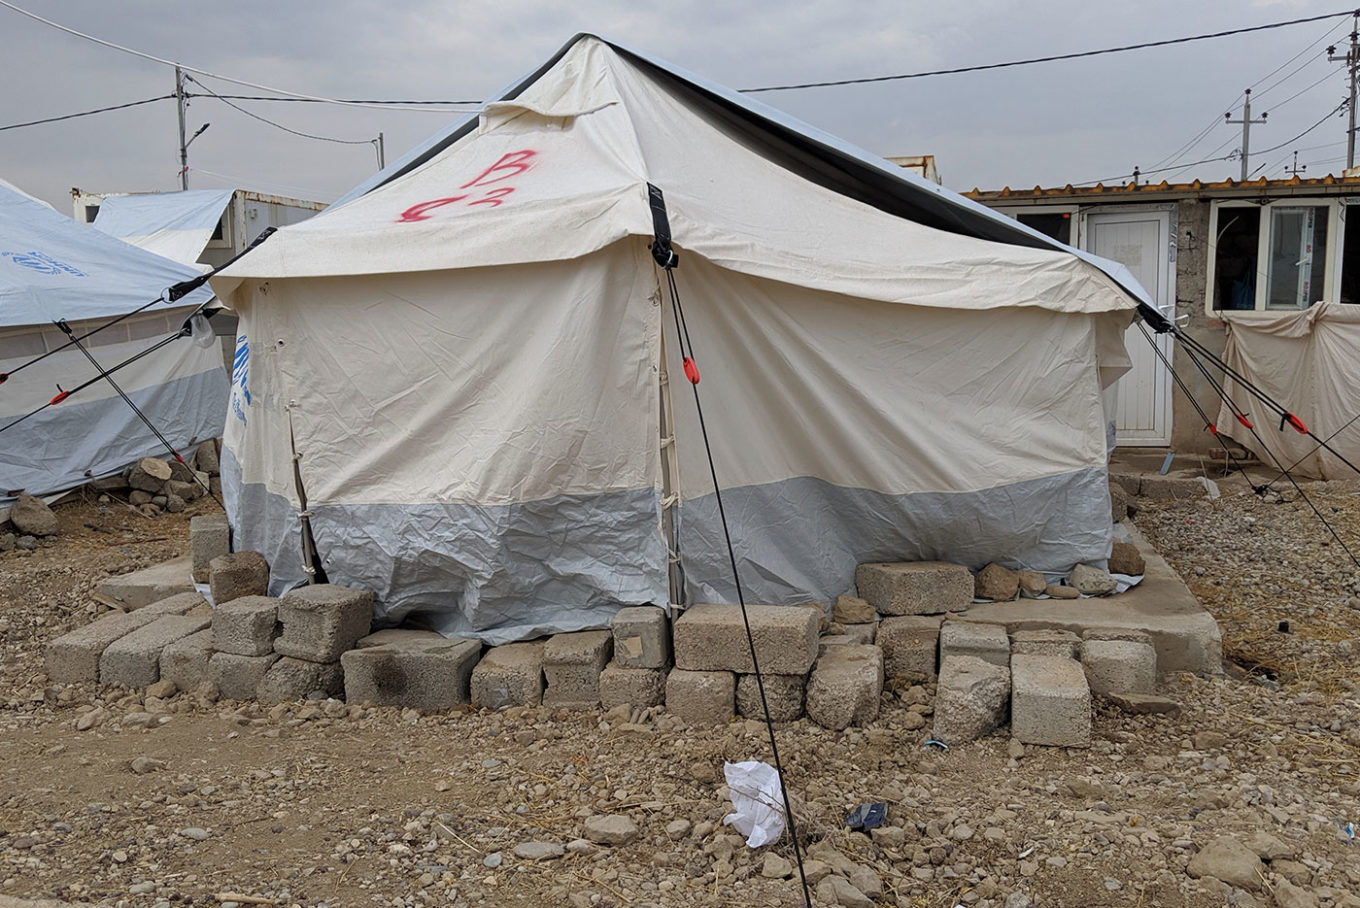 This tent is the temporary shelter for Lazgeen, 25, Maha, 22, and their baby daughter Meera